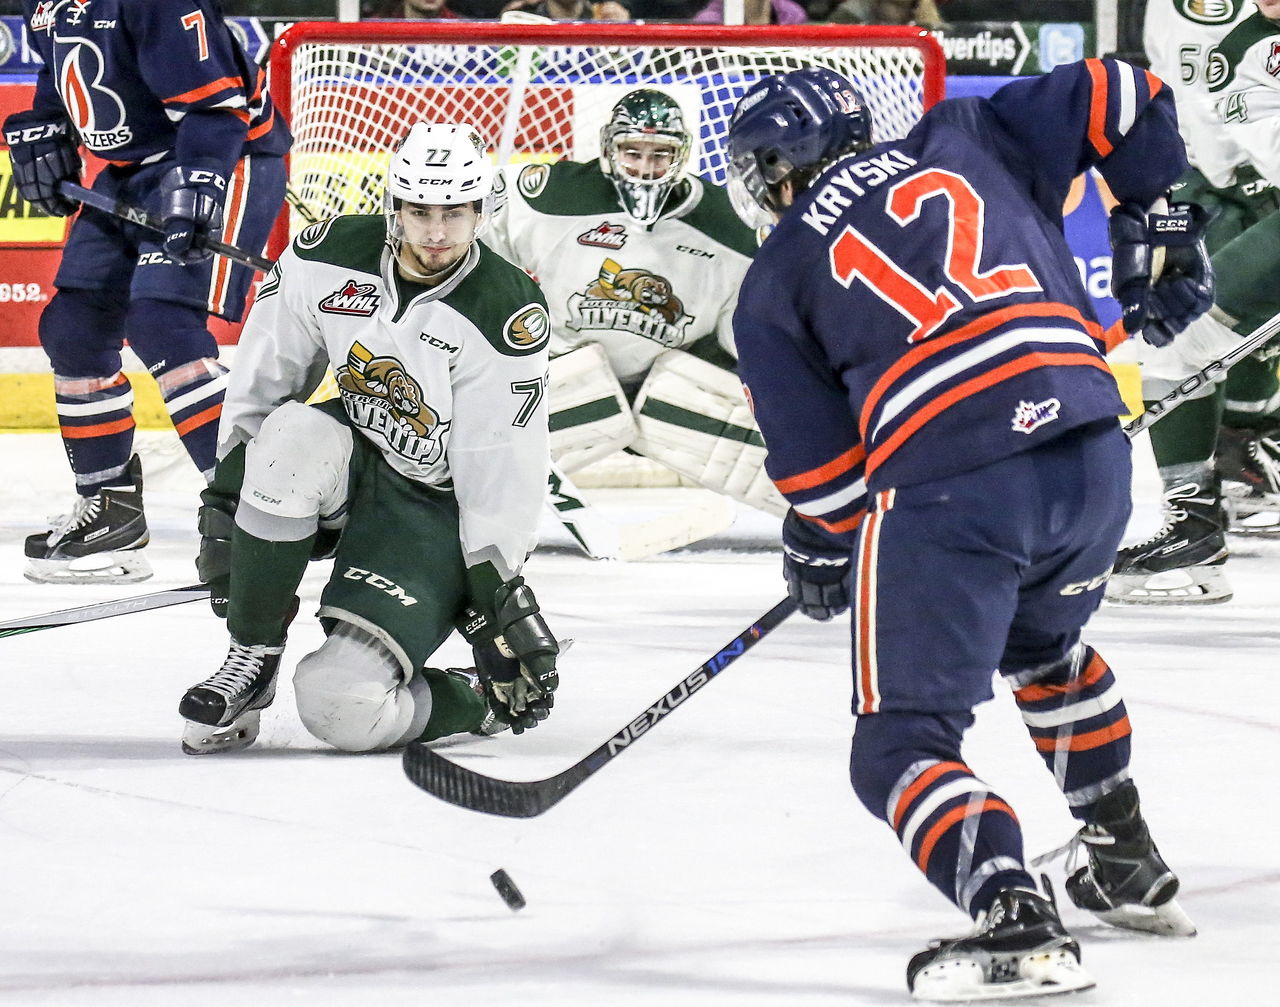 The Blazers’ Jake Kryski works the puck with the Silvertips’ Yan Khomenko defending during a game Friday night at Xfinity Arena in Everett.